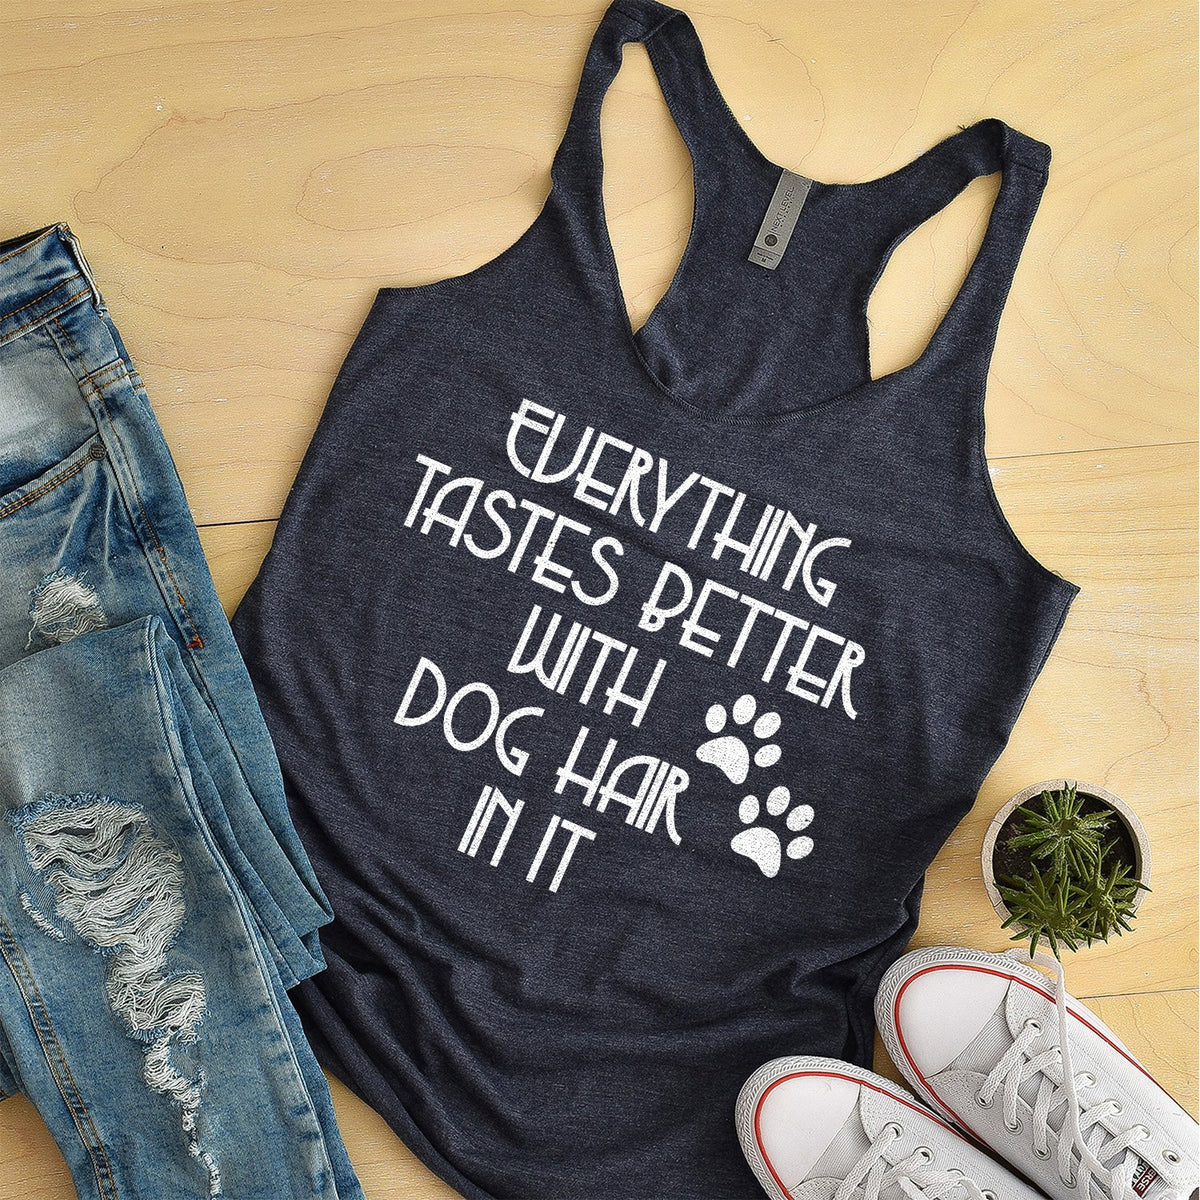 Everything Tastes Better with Dog Hair in It - Tank Top Racerback